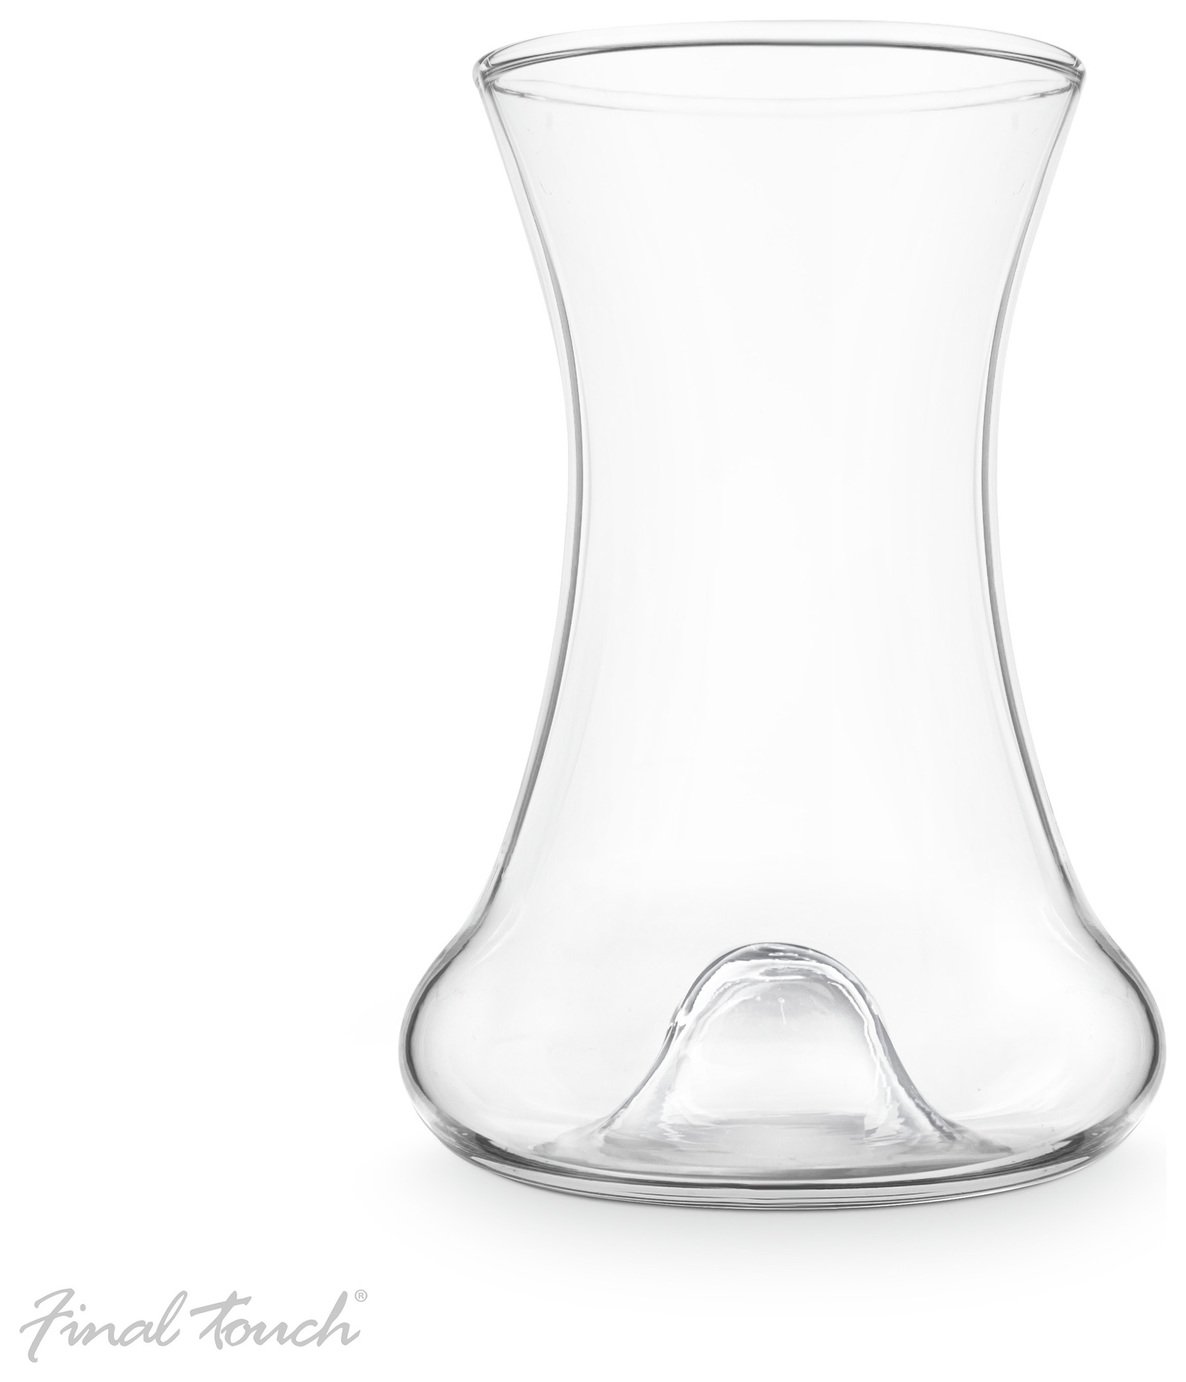 Final Touch Rum Tasting Glass